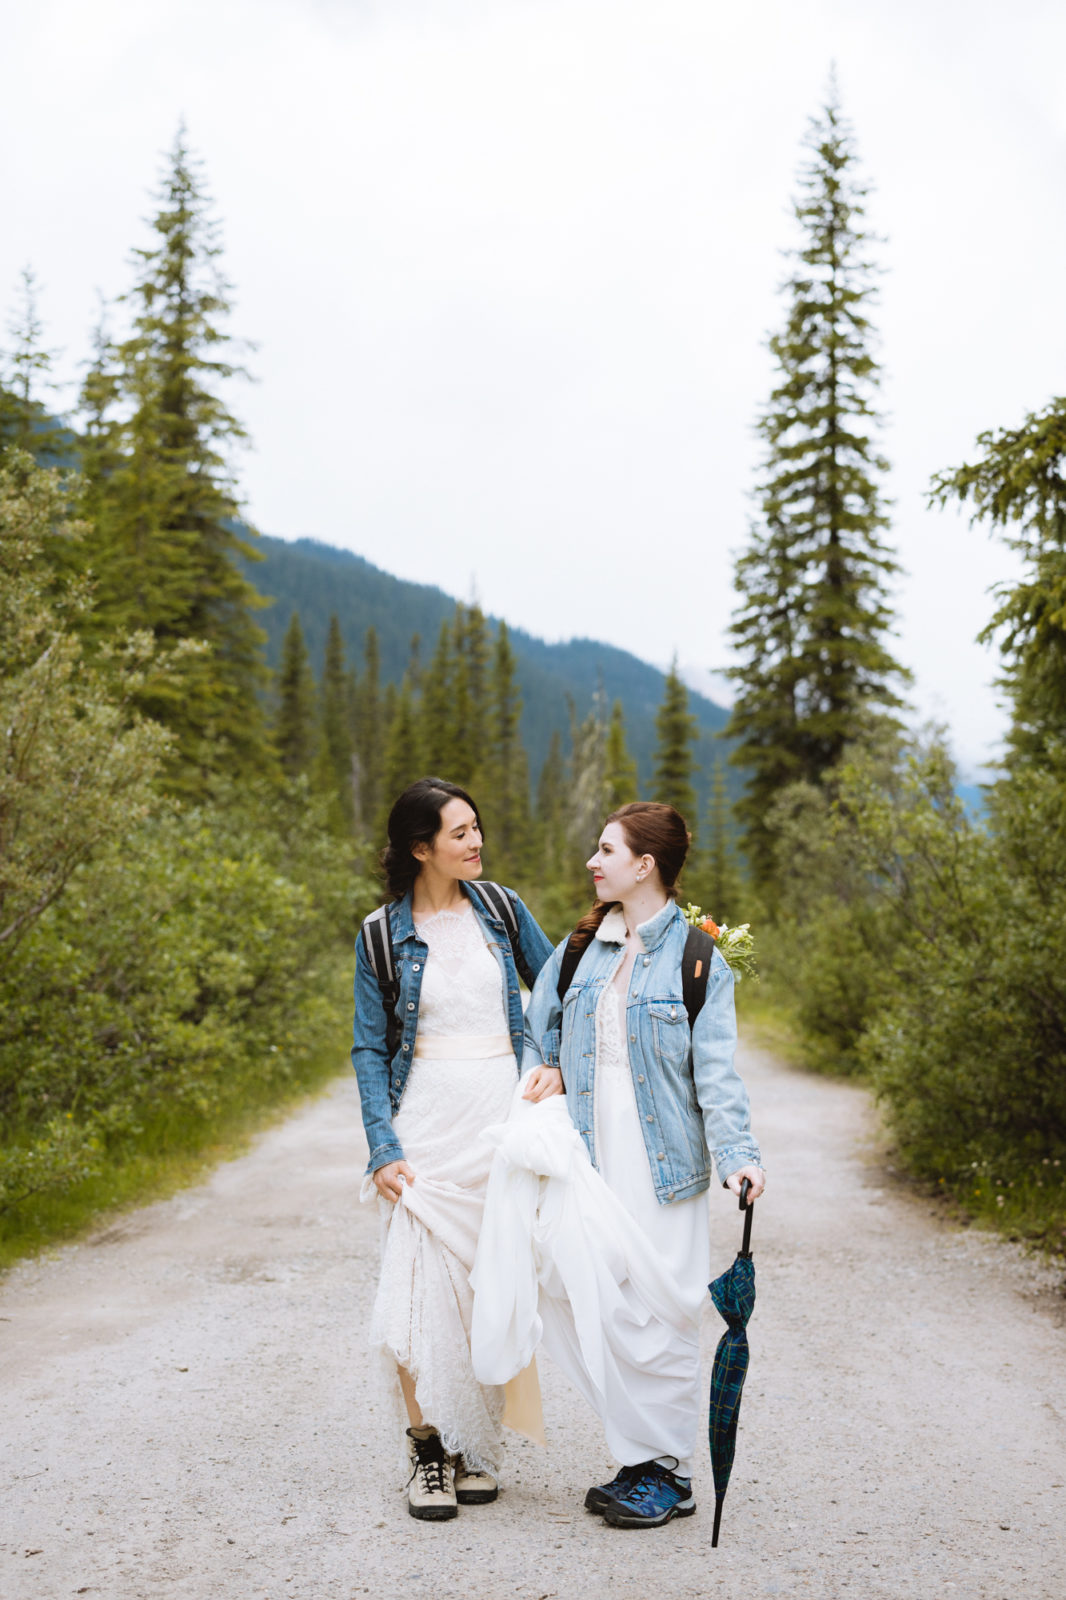 Brides wear matching jean jackets and hiking boots for their Elopement in Yoho National Park